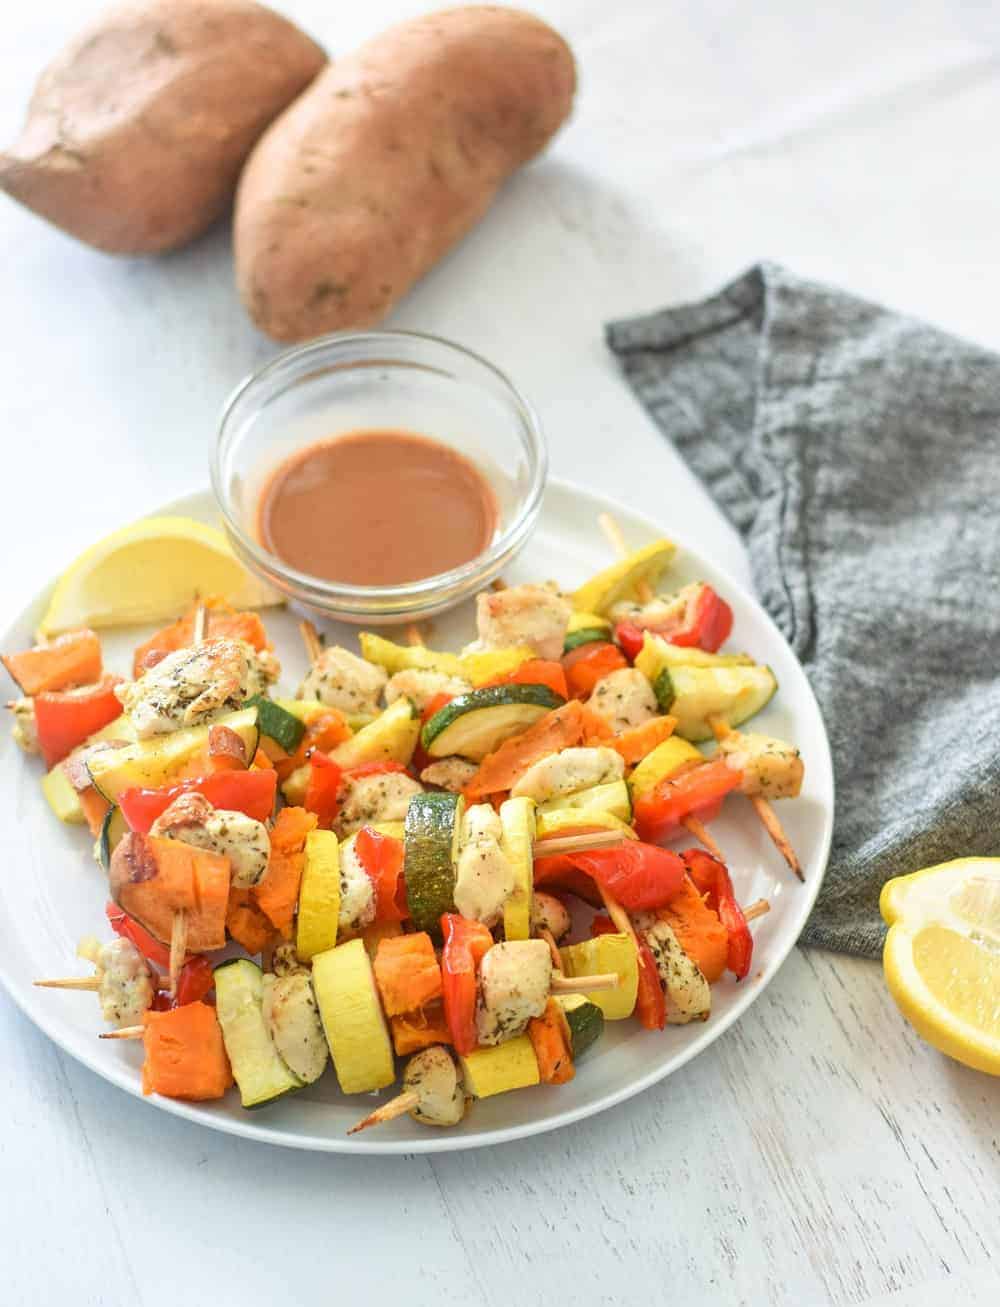 white plate with easy oven baked kebabs with chicken and vegetables and creamy sauce for dipping